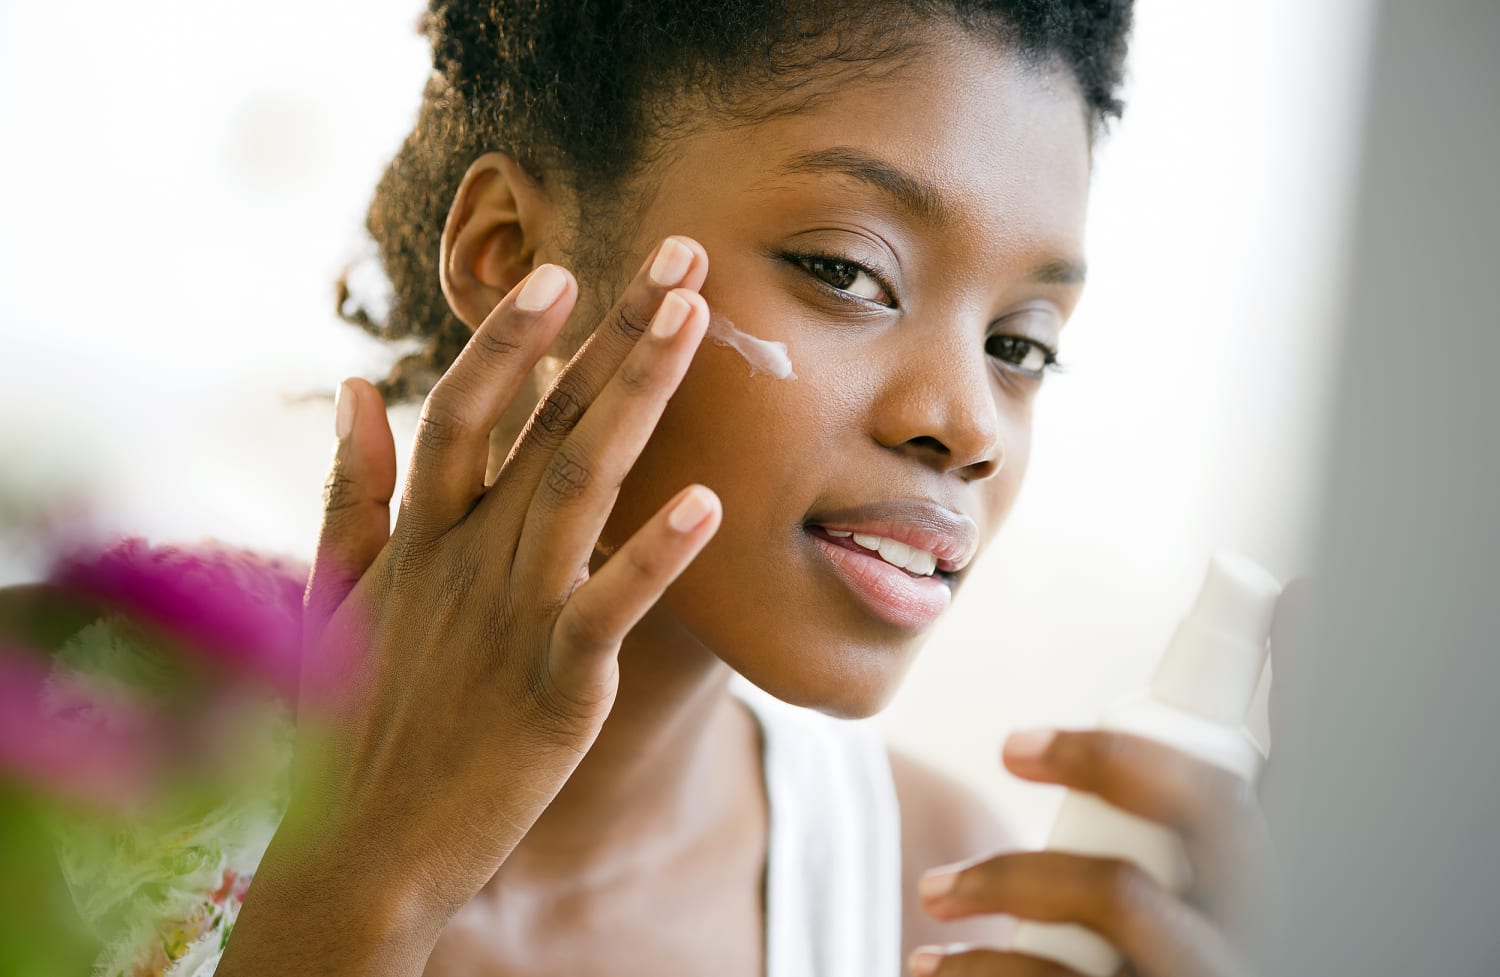 Here are some additional tips for winter skincare: